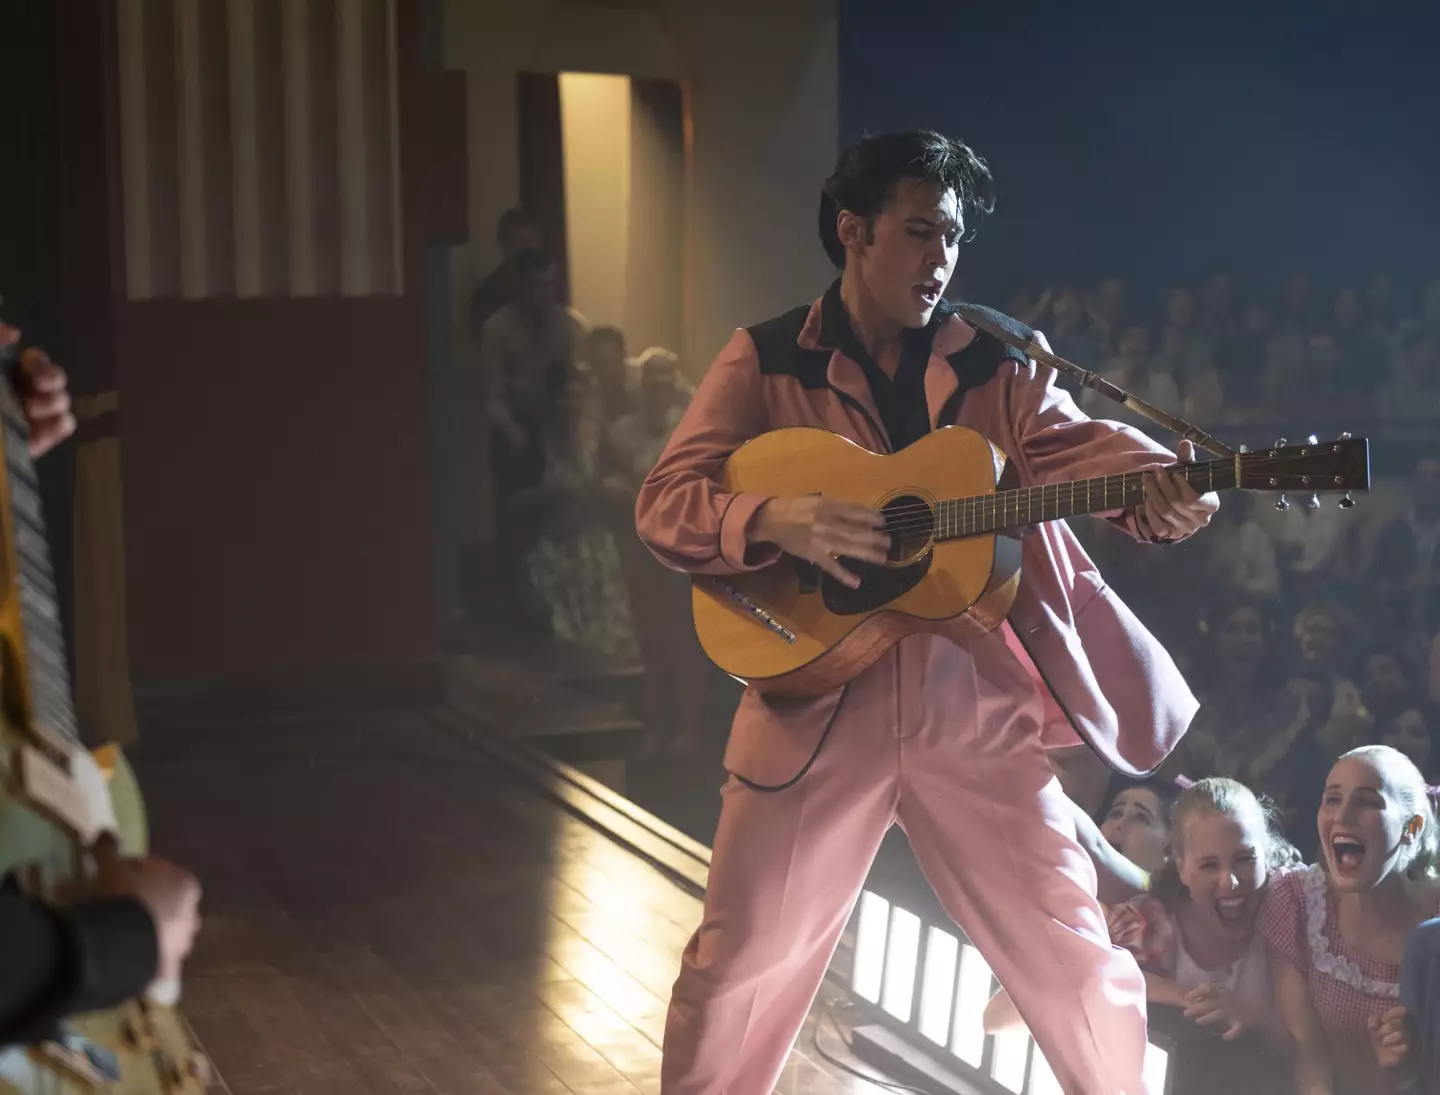 Austin Butler wowed critics and audiences with his performance as Elvis Presley.